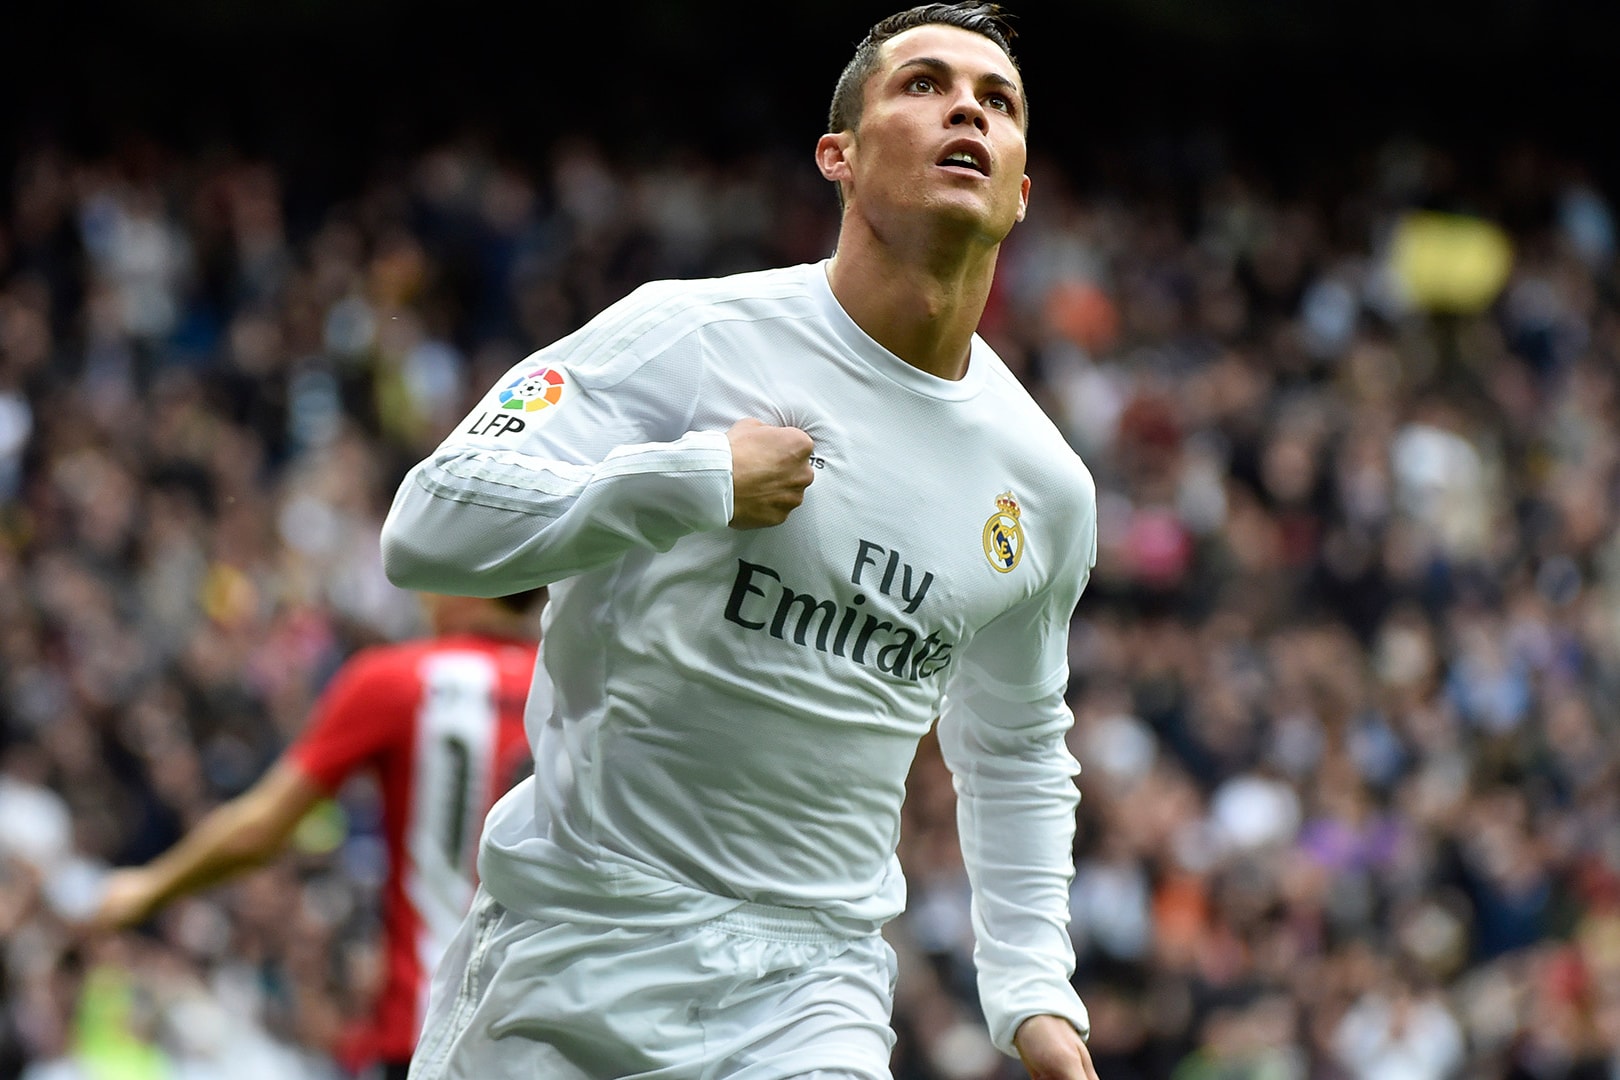 After Champions League win, future unclear for Real Madrid stars Ronaldo,  Bale